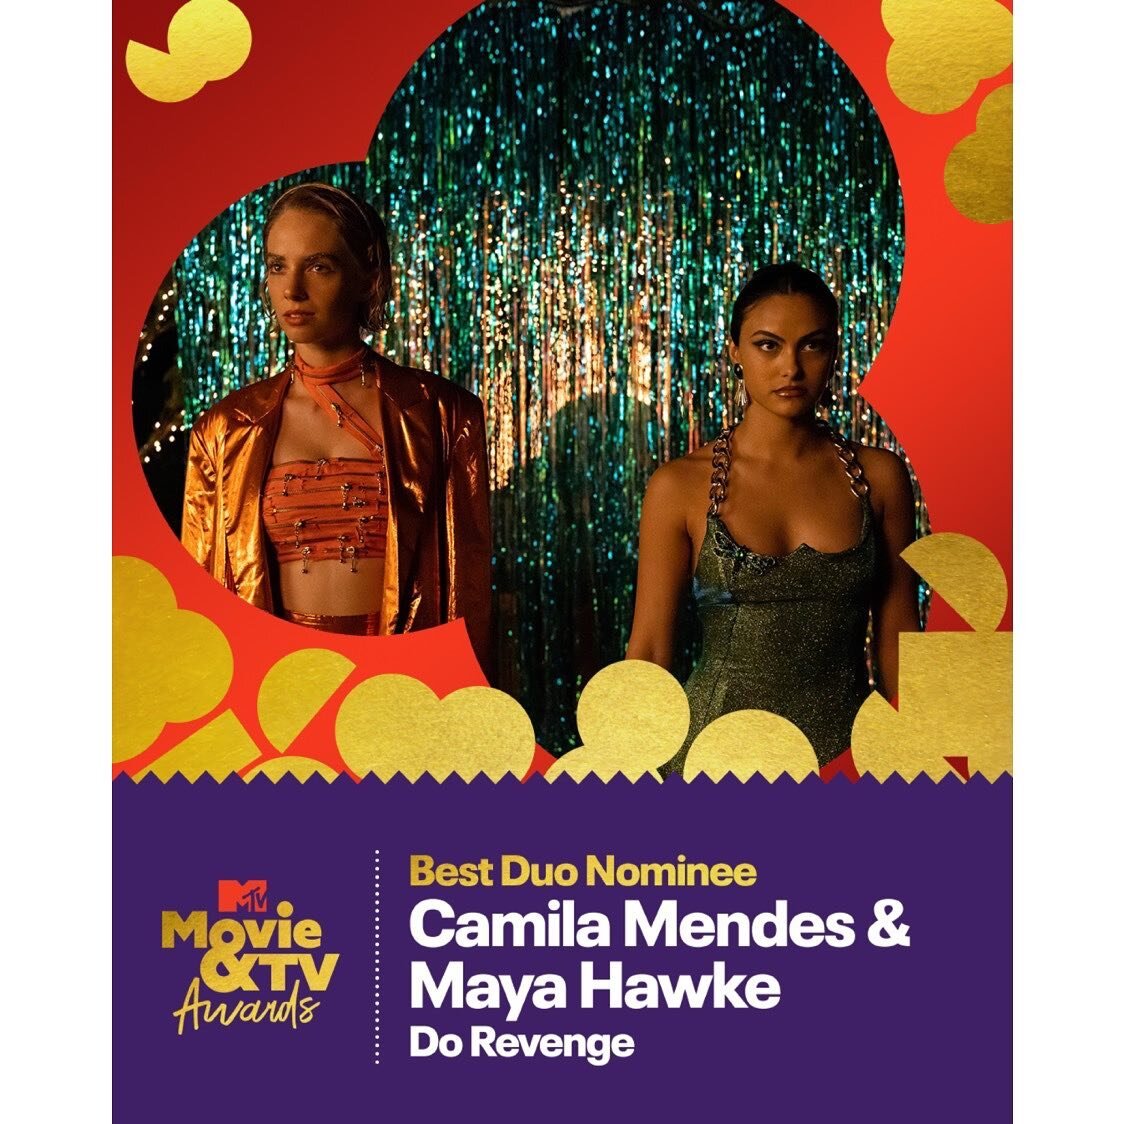 Gold Popcorn is HOT 🍿 

@camimendes and @maya_hawke  were nominated for Best Duo at the 2023 #MTVAwards! Vote every day at vote.mtv.com and see who wins May 7 on @MTV!

#dorevenge #mtvawards #bestduo #netflix